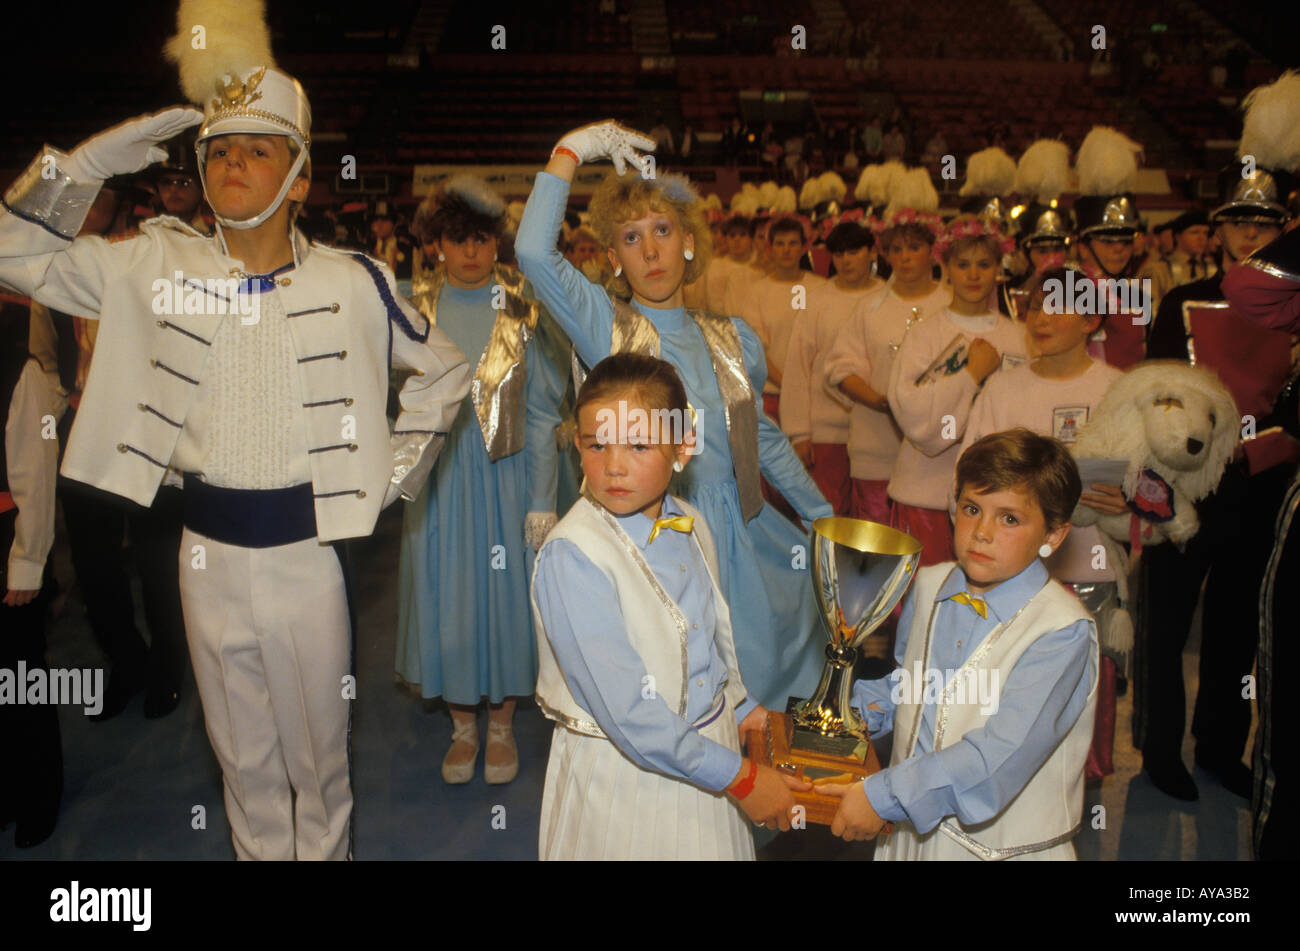 Win winning first prize, Dancing Bands prize giving Wembley London. 1990s UK HOMER SYKES Stock Photo